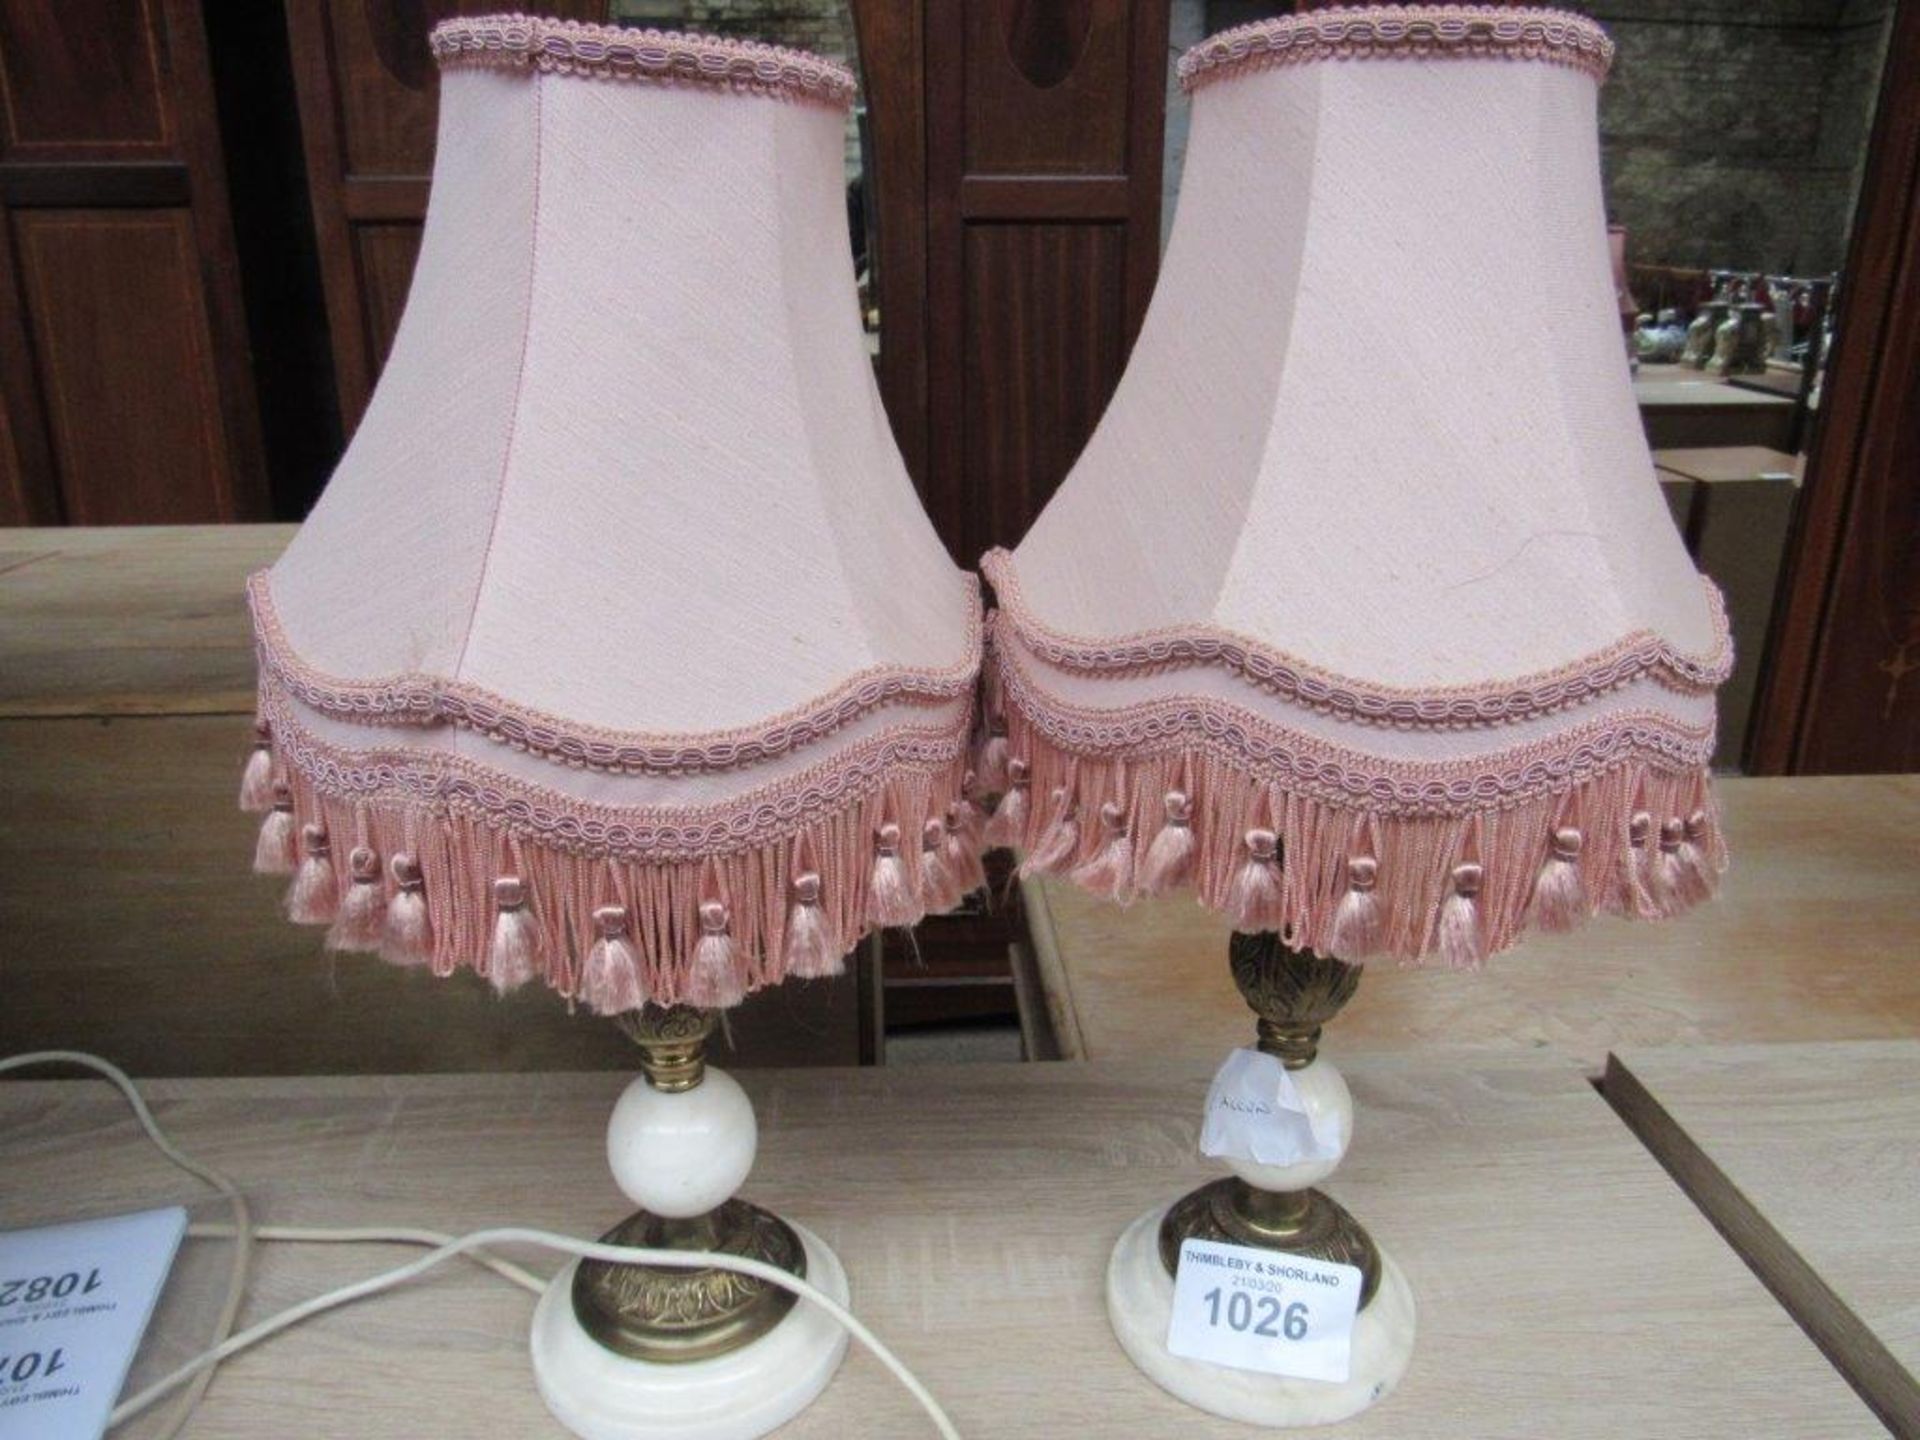 Pair of Onyx table lamps and shades, height of lamp 28cms. Brass and marble columned table lamp